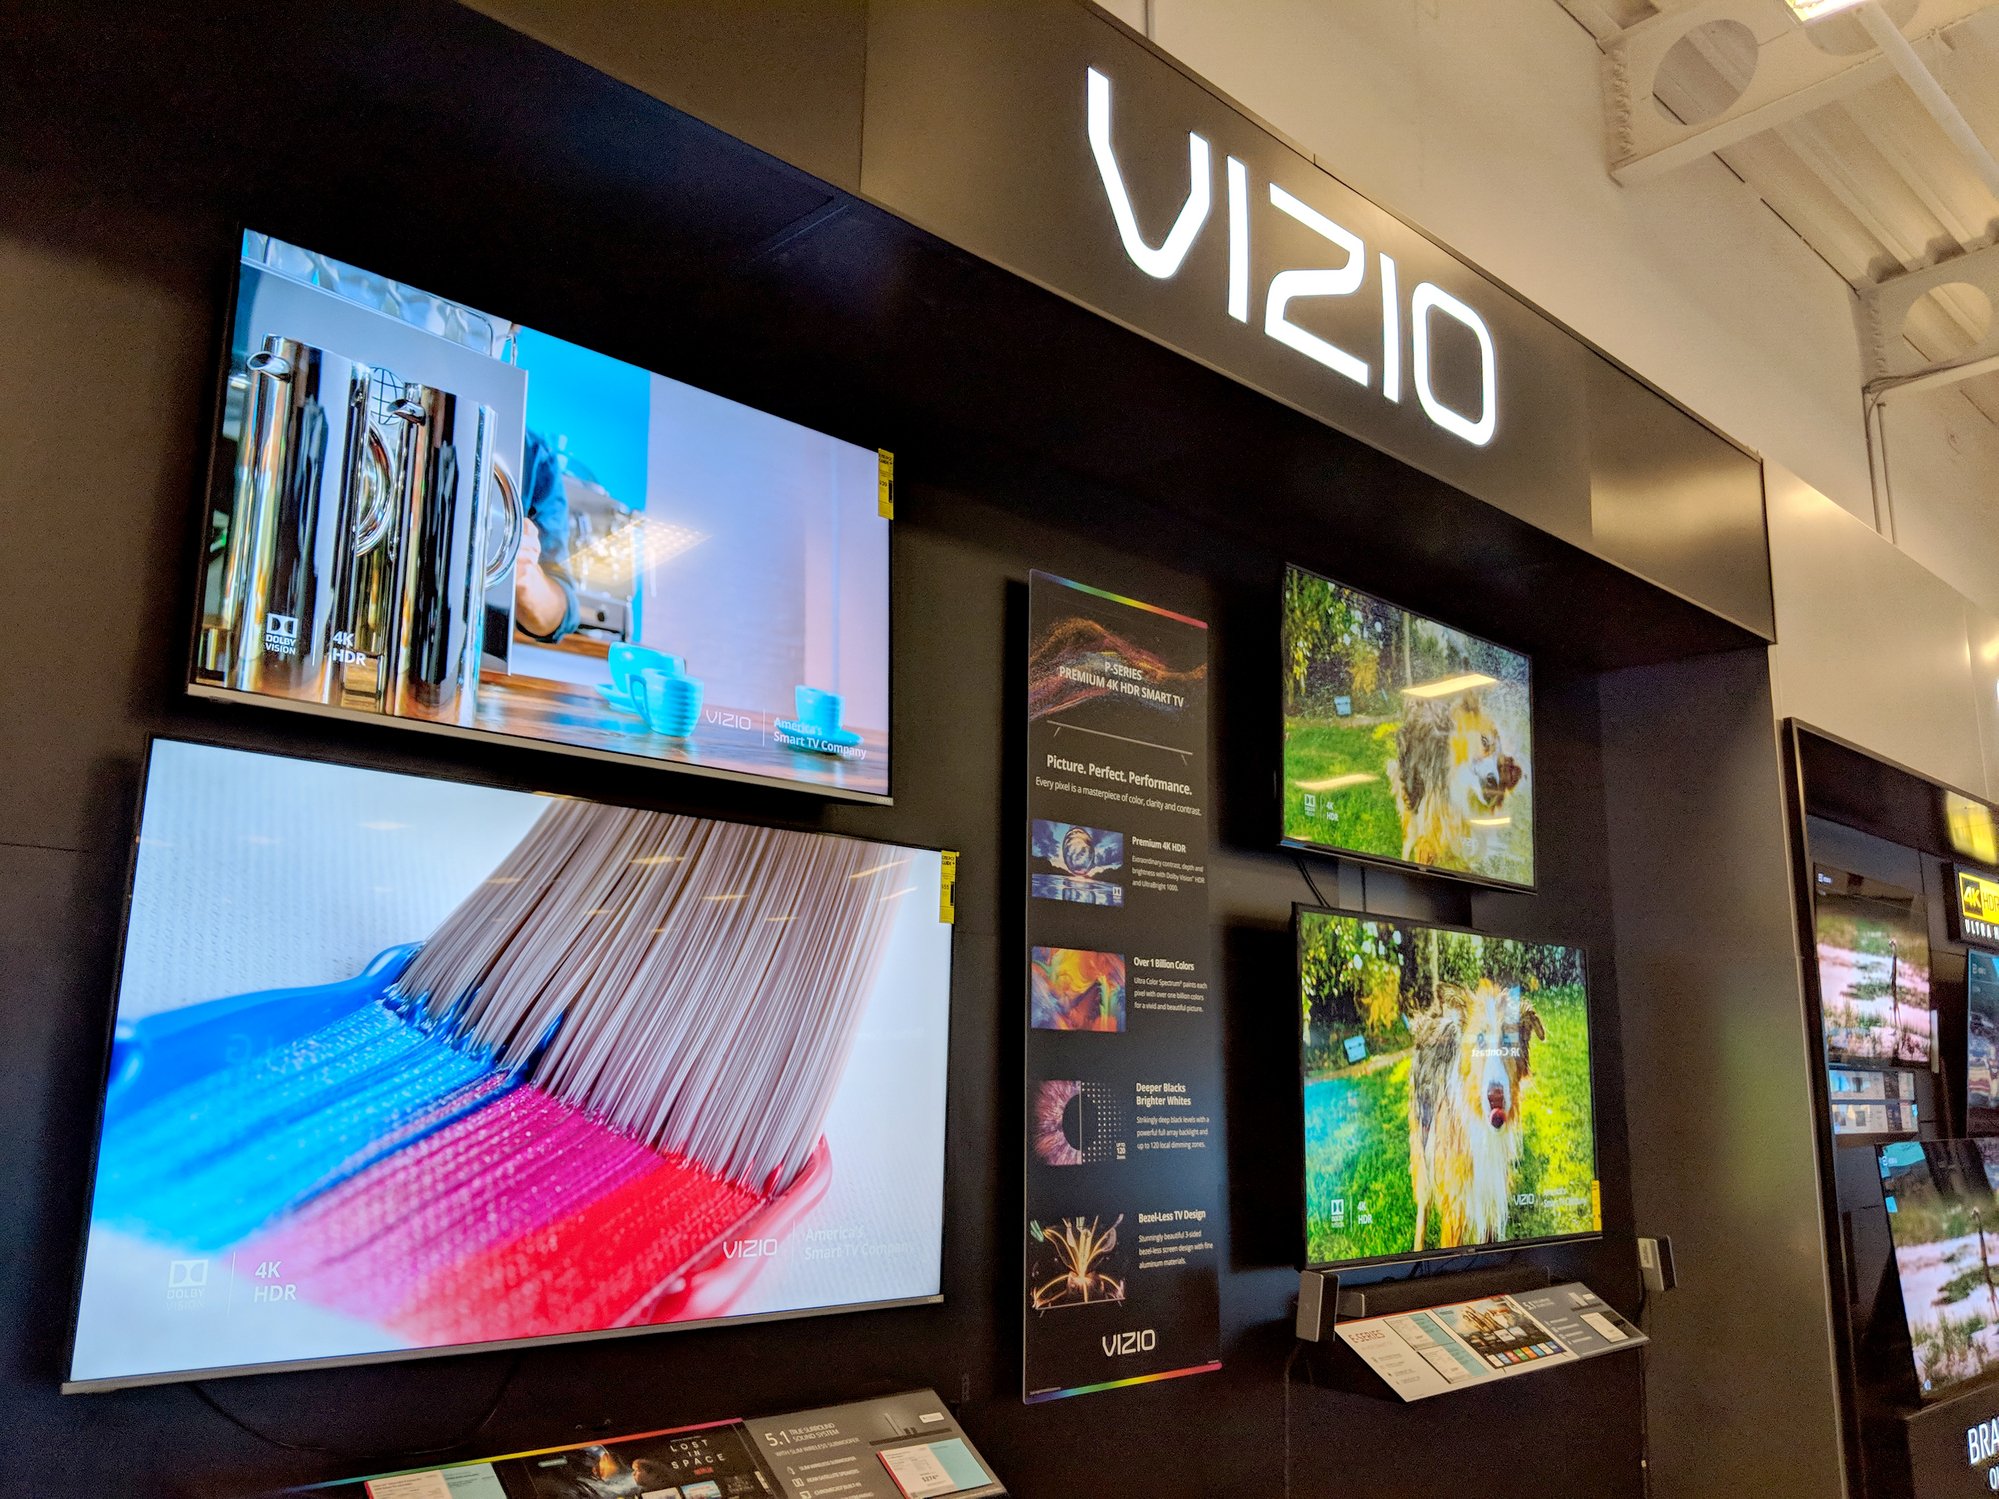 How To Easily Connect Laptop To Vizio Smart TV Wirelessly